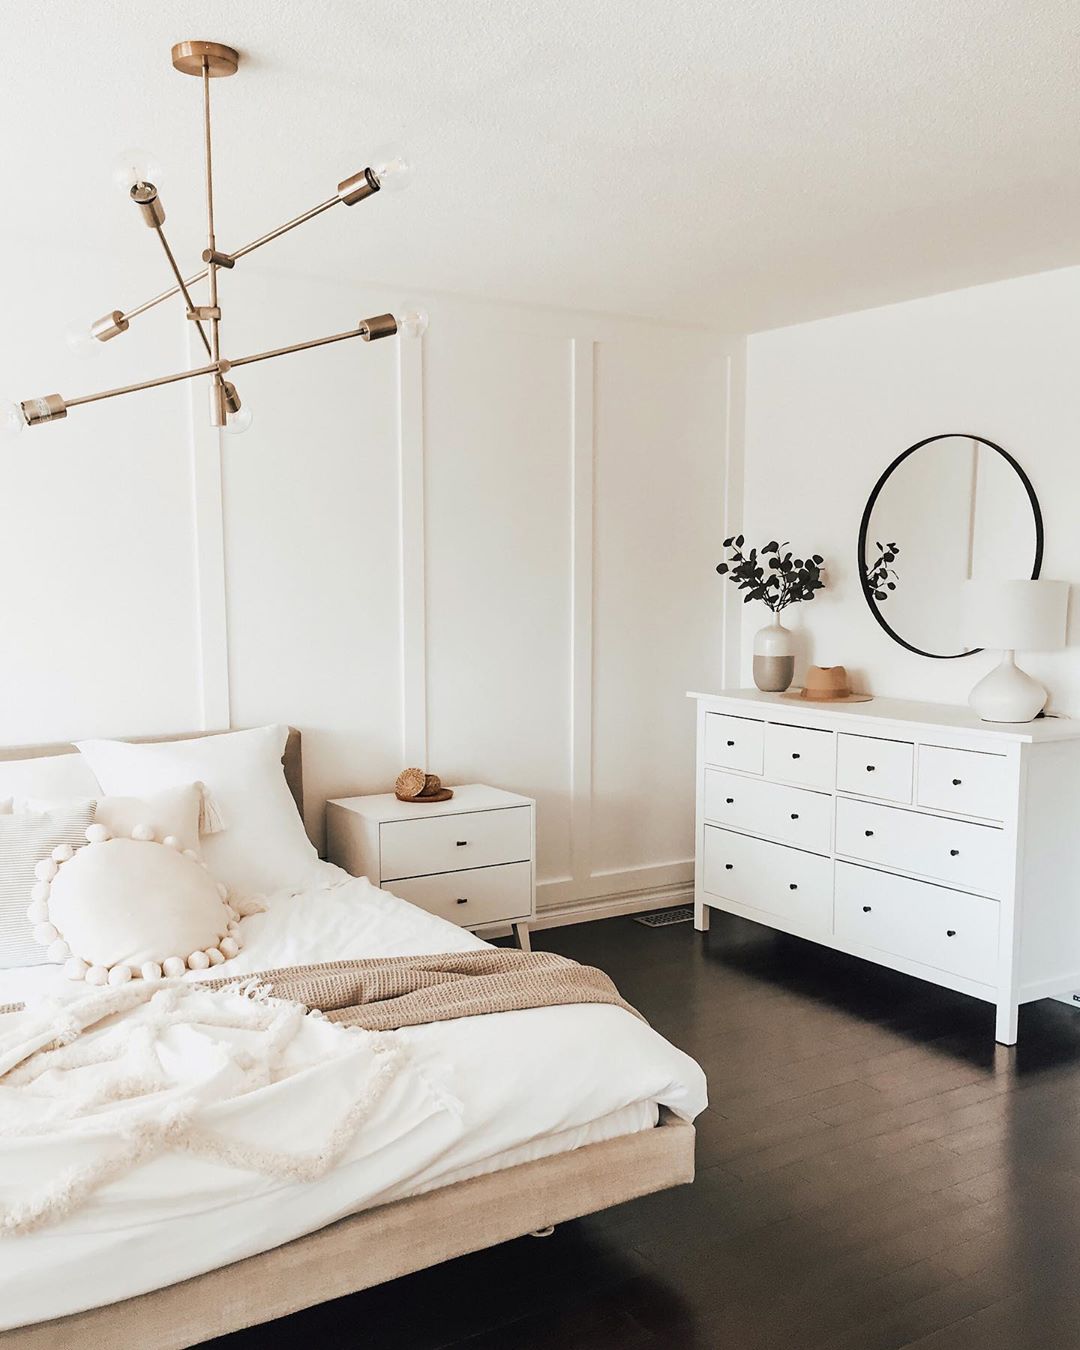 Minimalist Bedroom with Cleared Floors and Matching Furniture. Photo by Instagram user @melb_lifeandhome